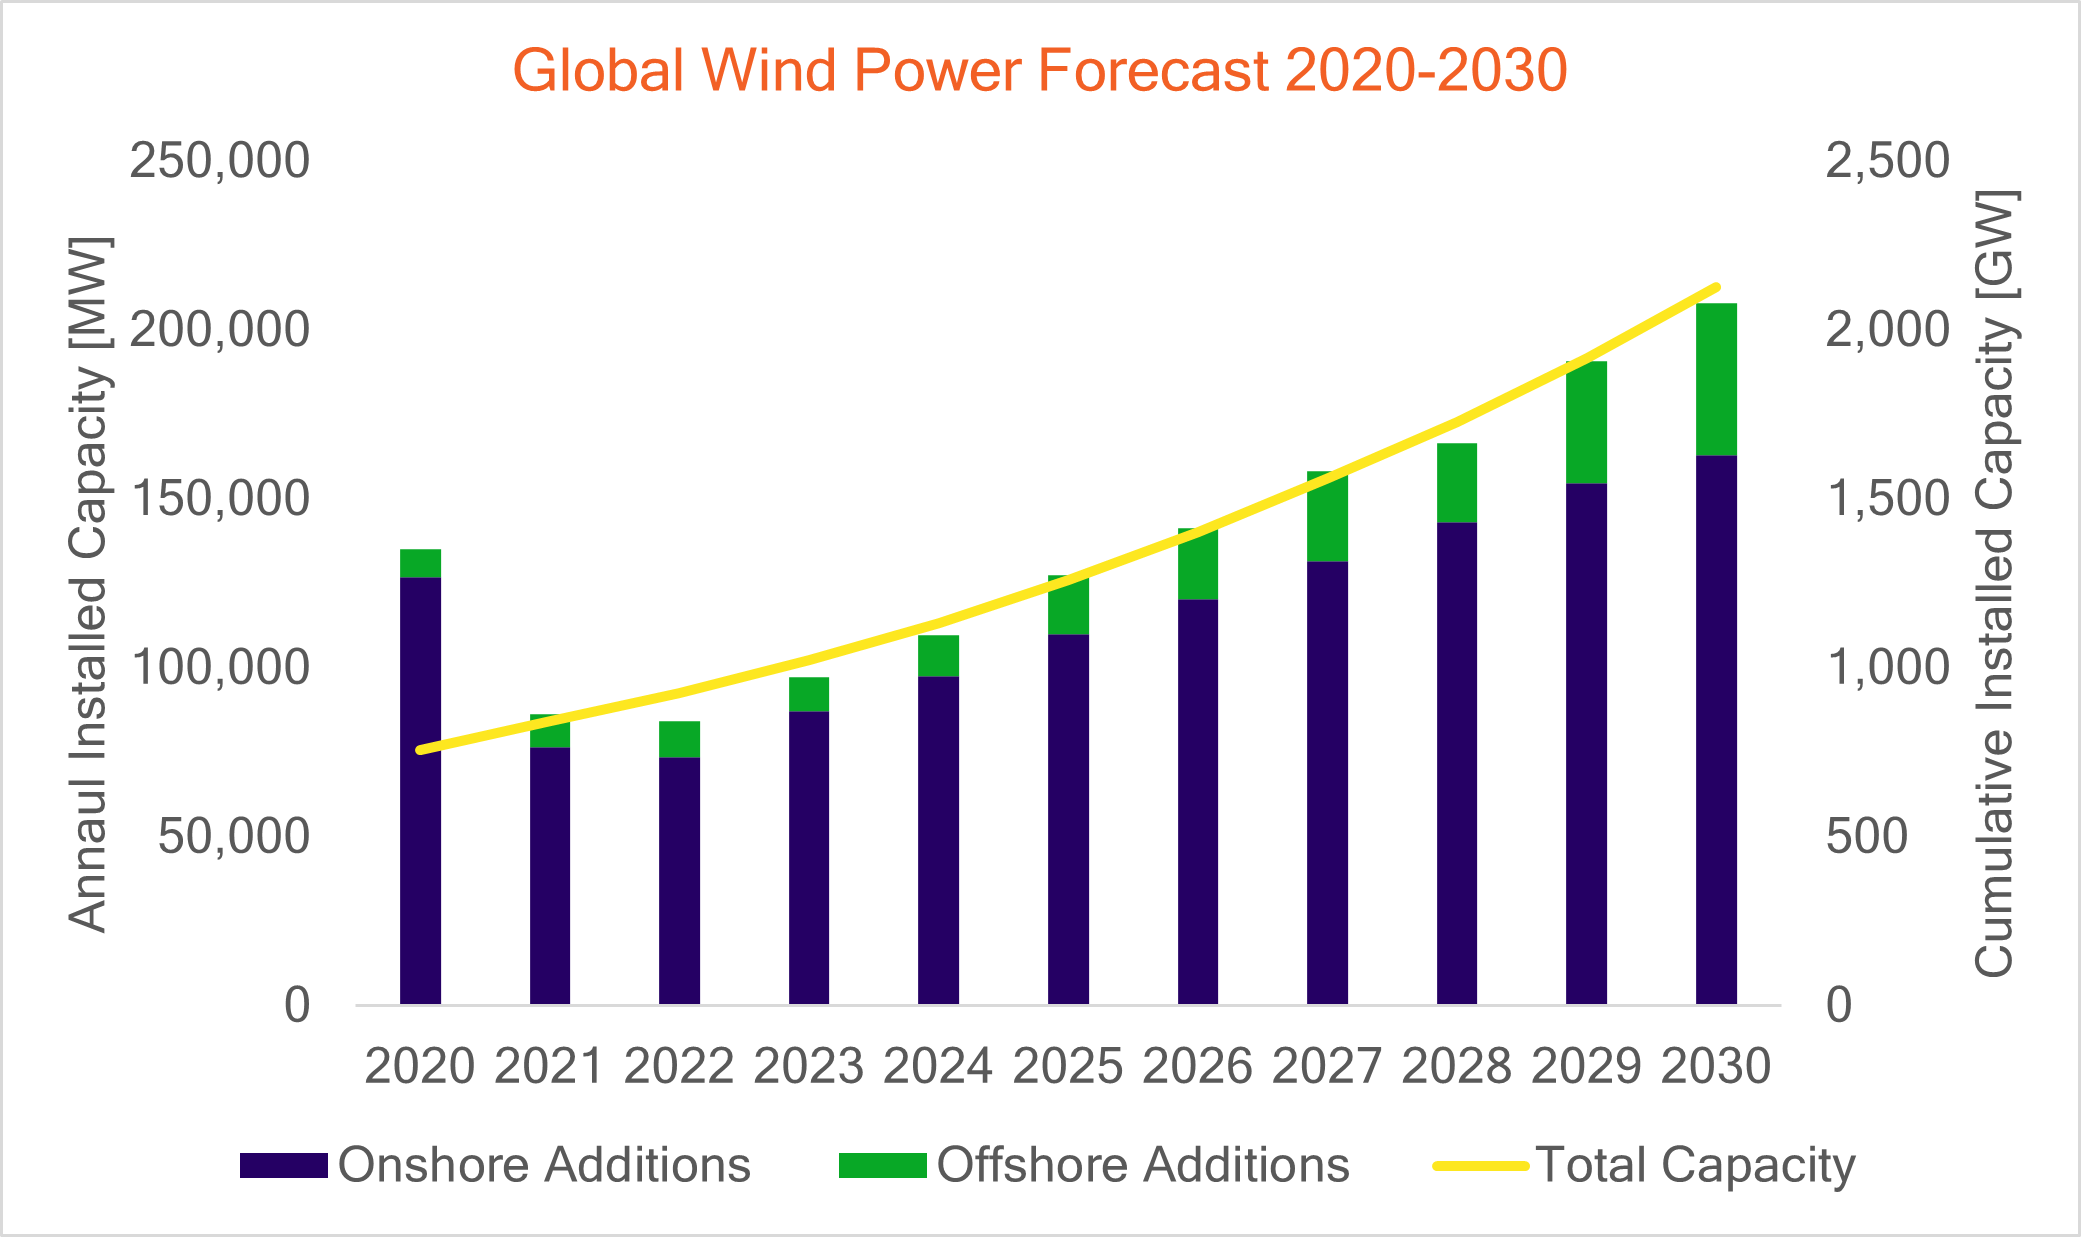 Wind to account for twothirds of global power production by 2030